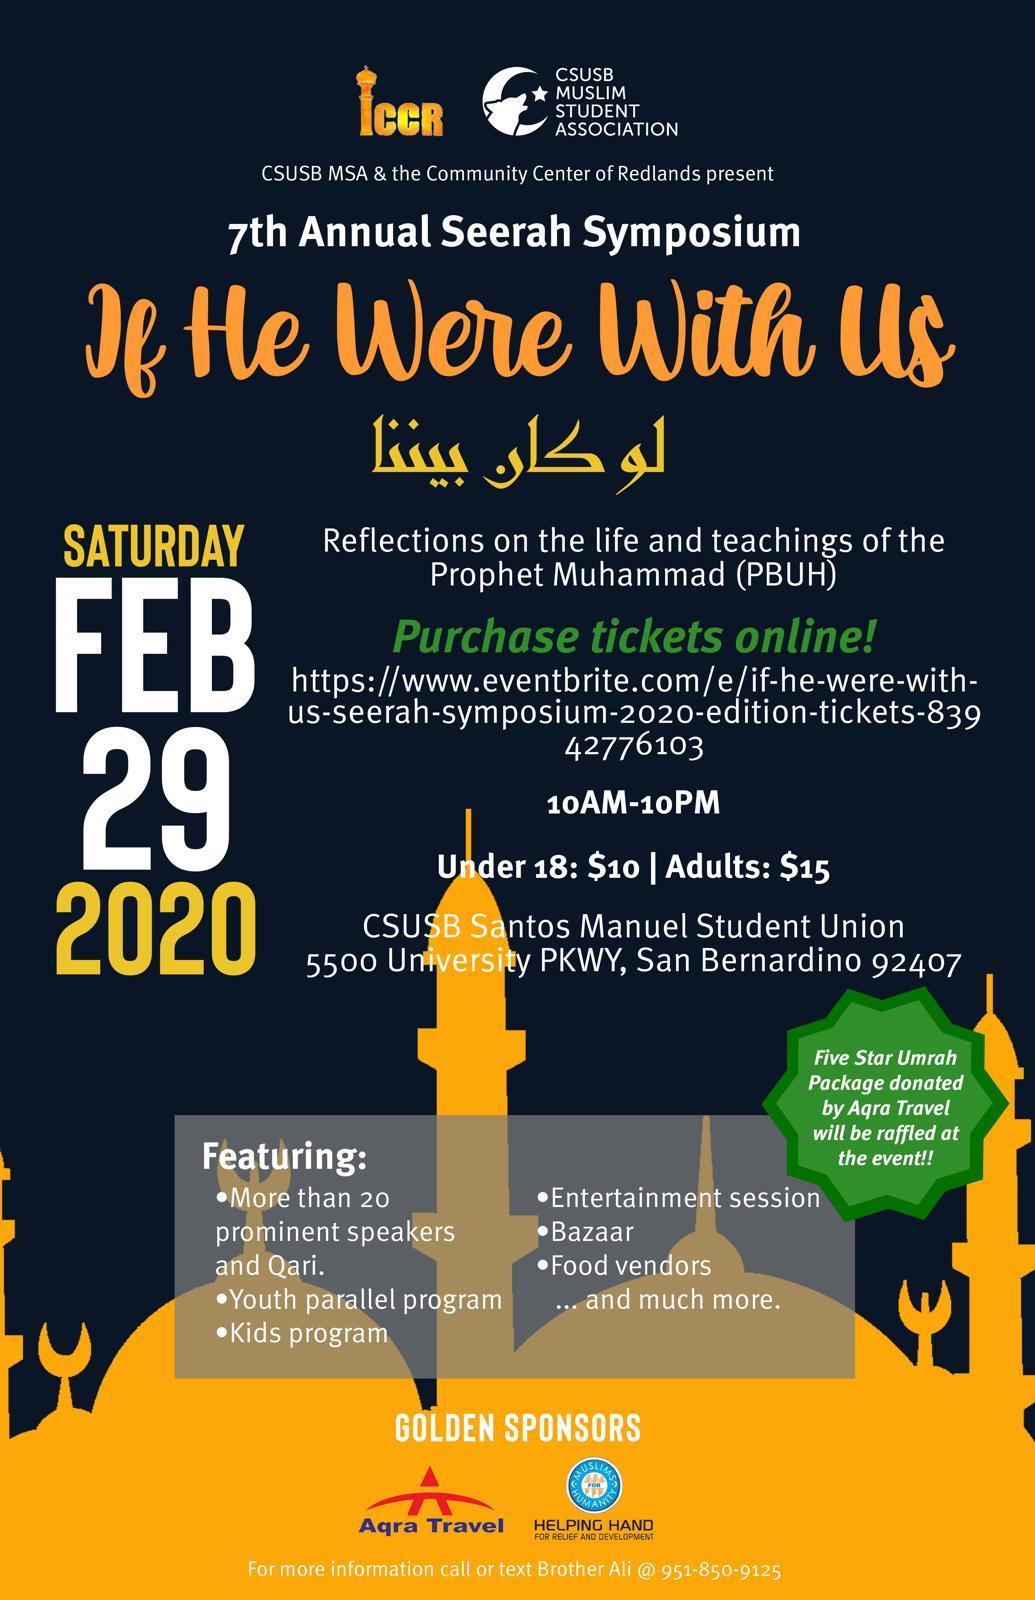 “If He Were With Us” Seerah Symposium 2020 Edition 